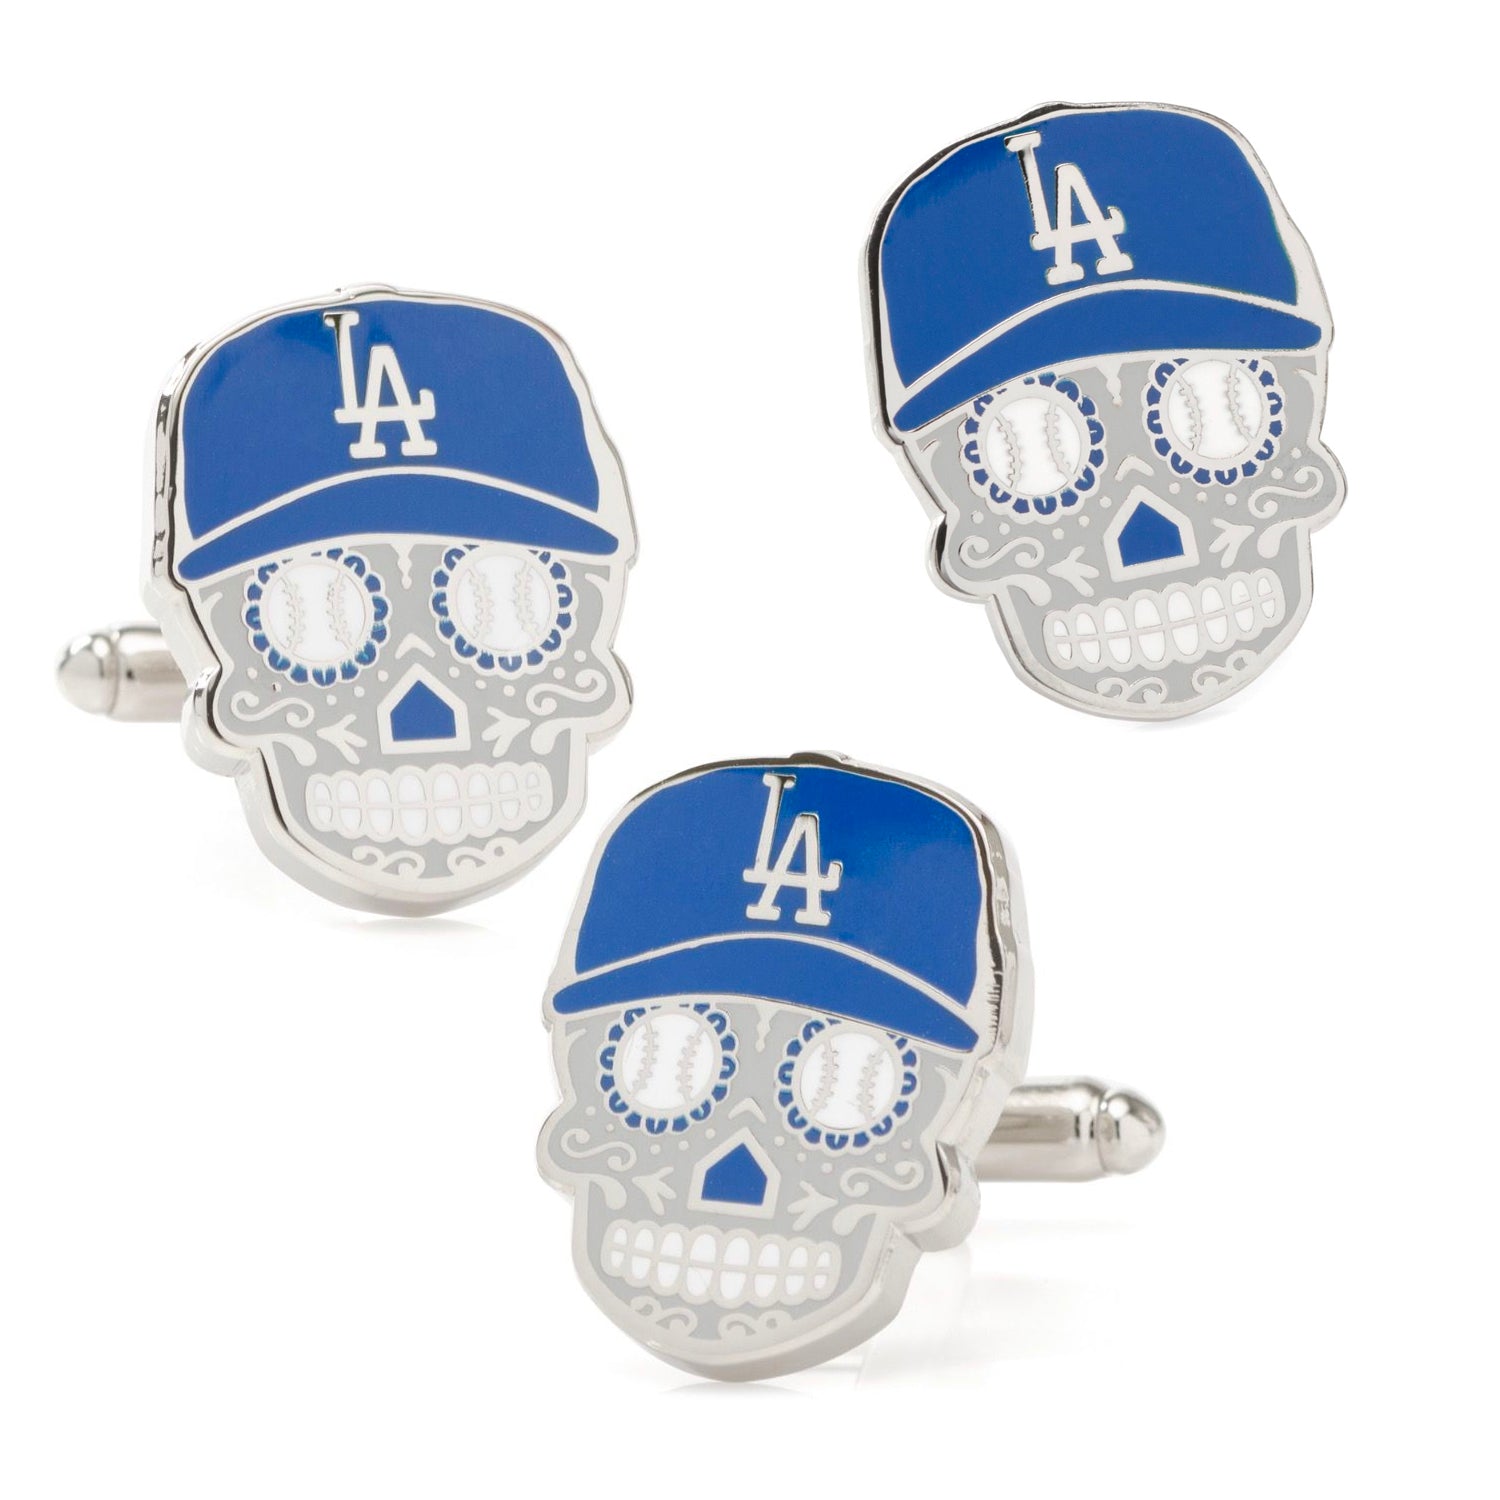 Pin on dodgers